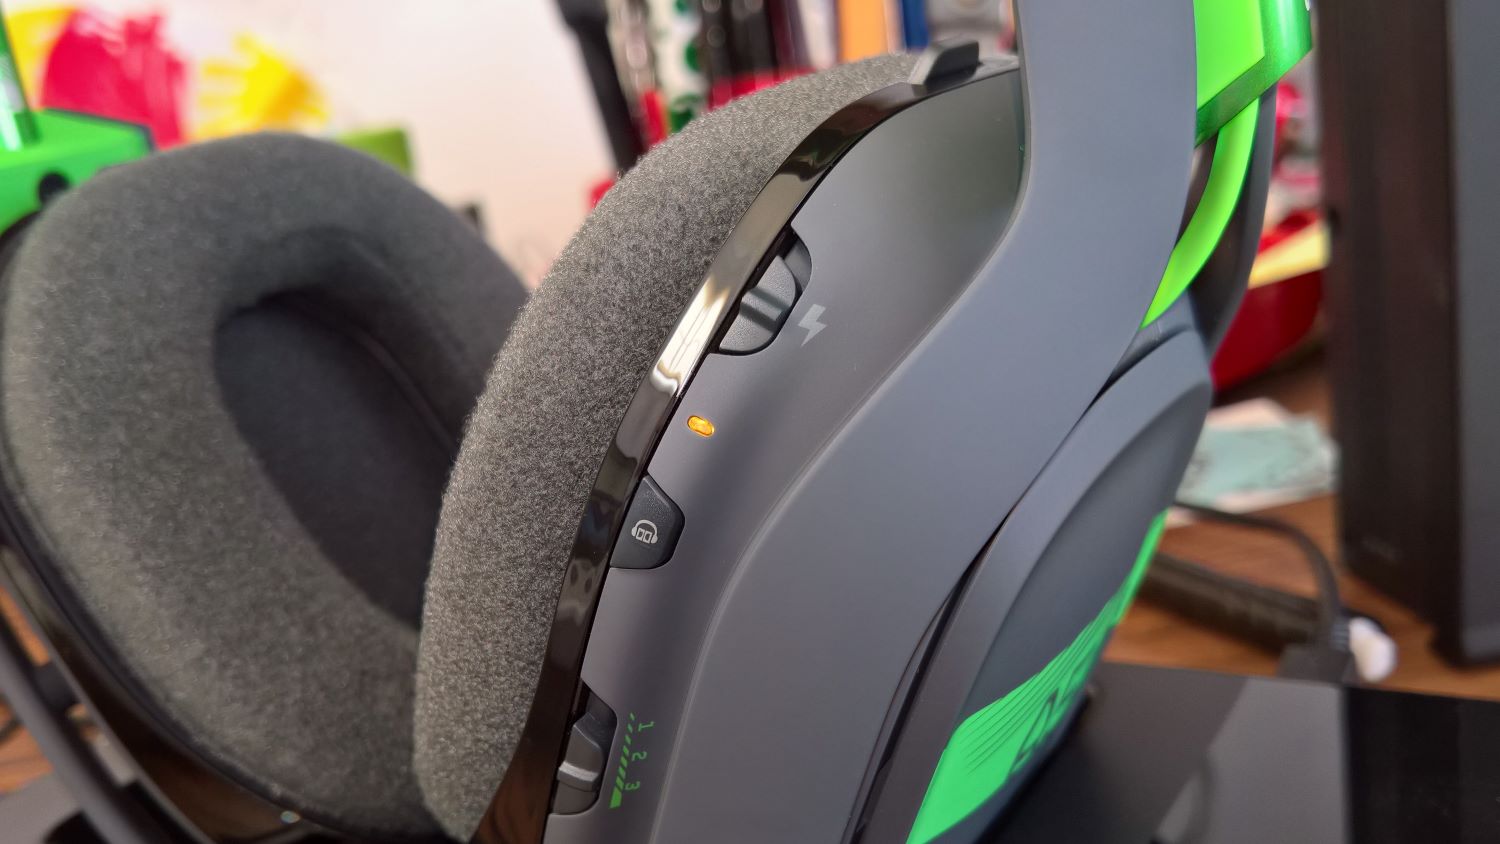 astro a50 dolby headset